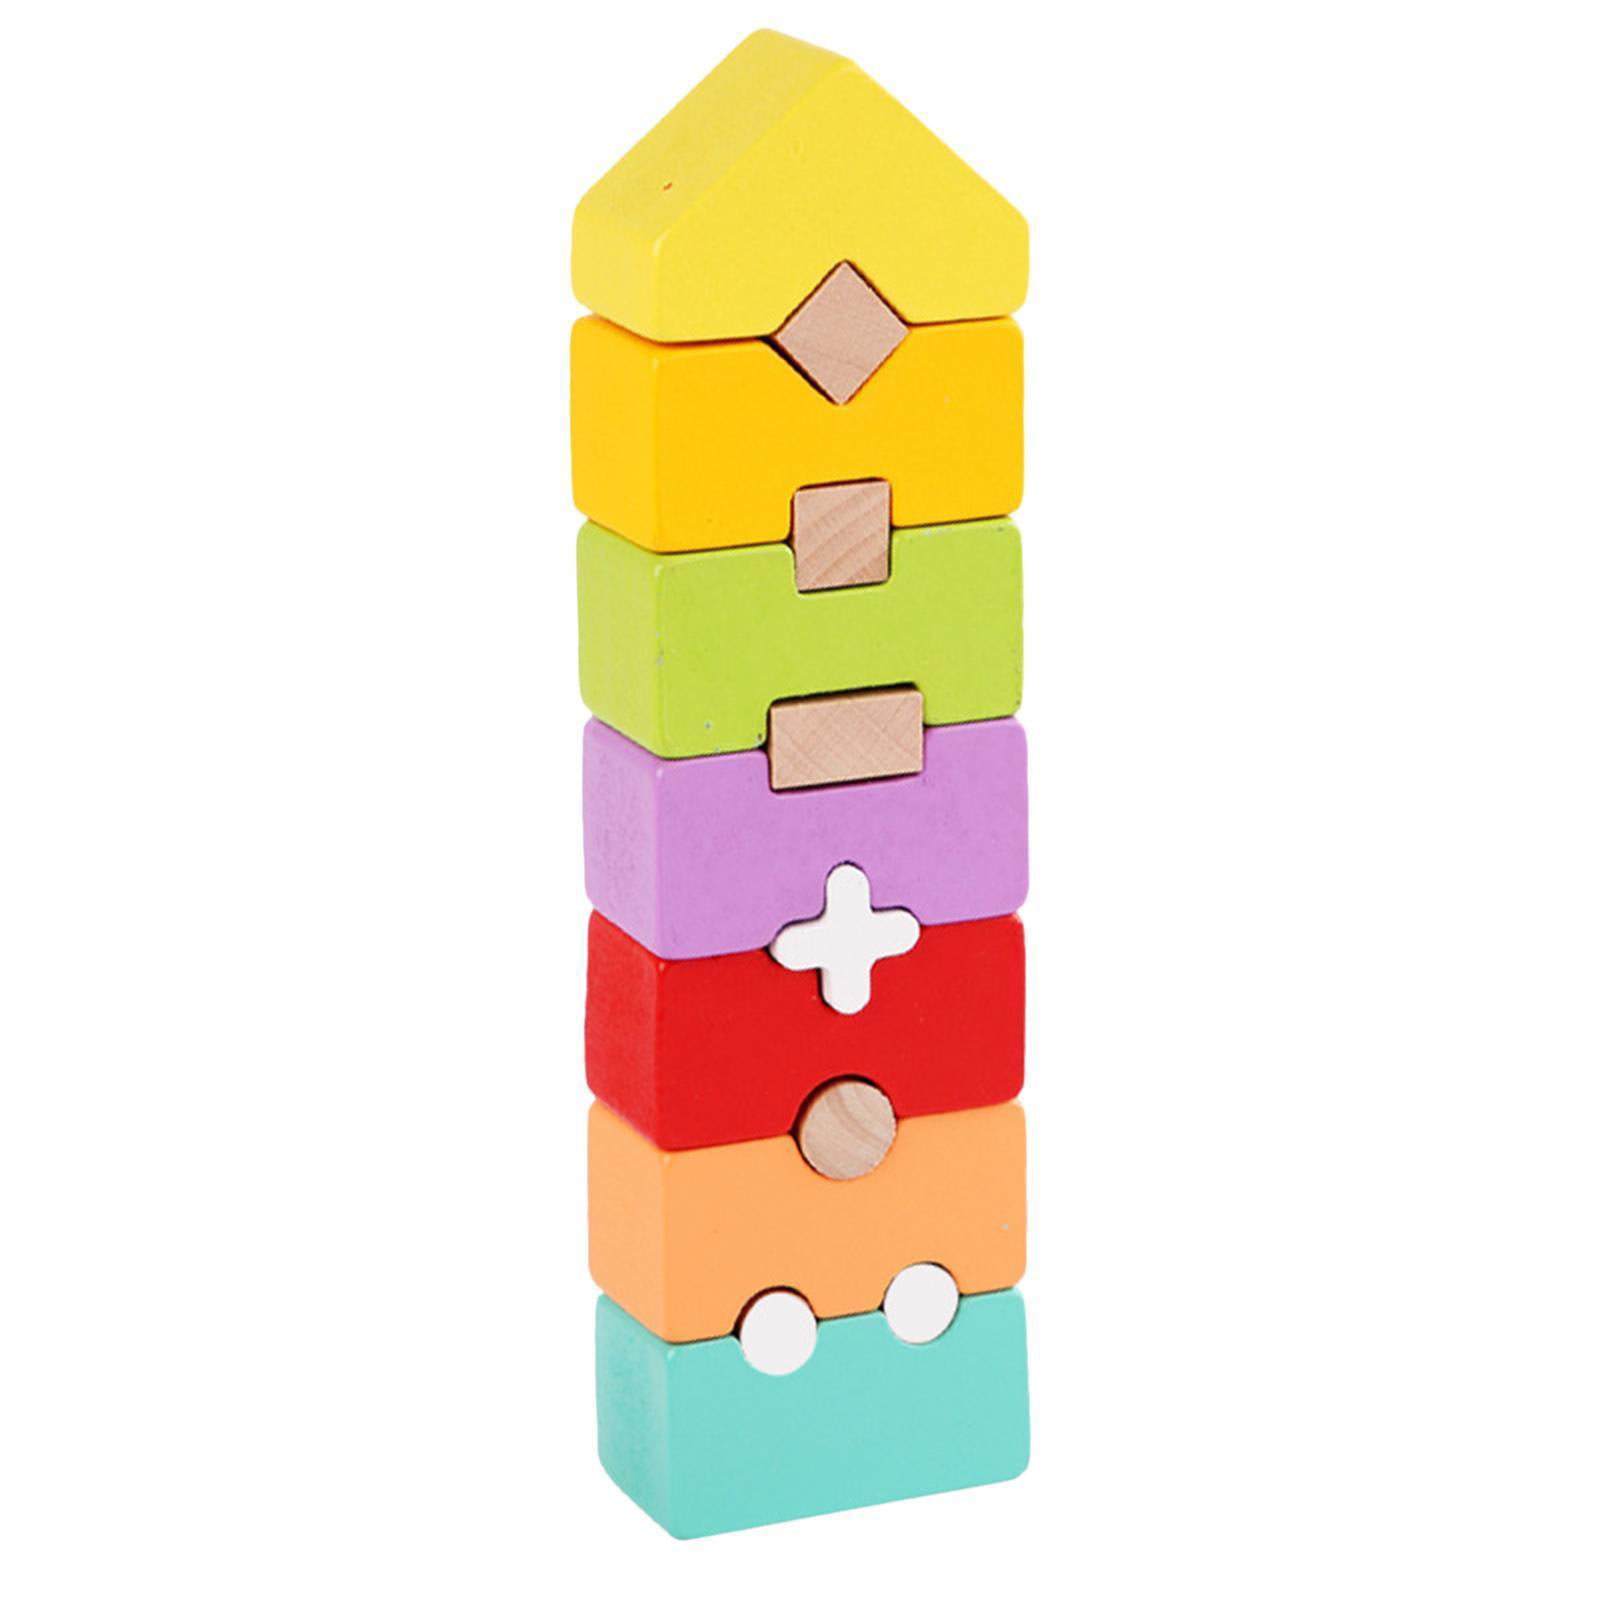 Details about   Colorful DIY Assembled House Rainbow Building Blocks Set Stacking Game Toys 